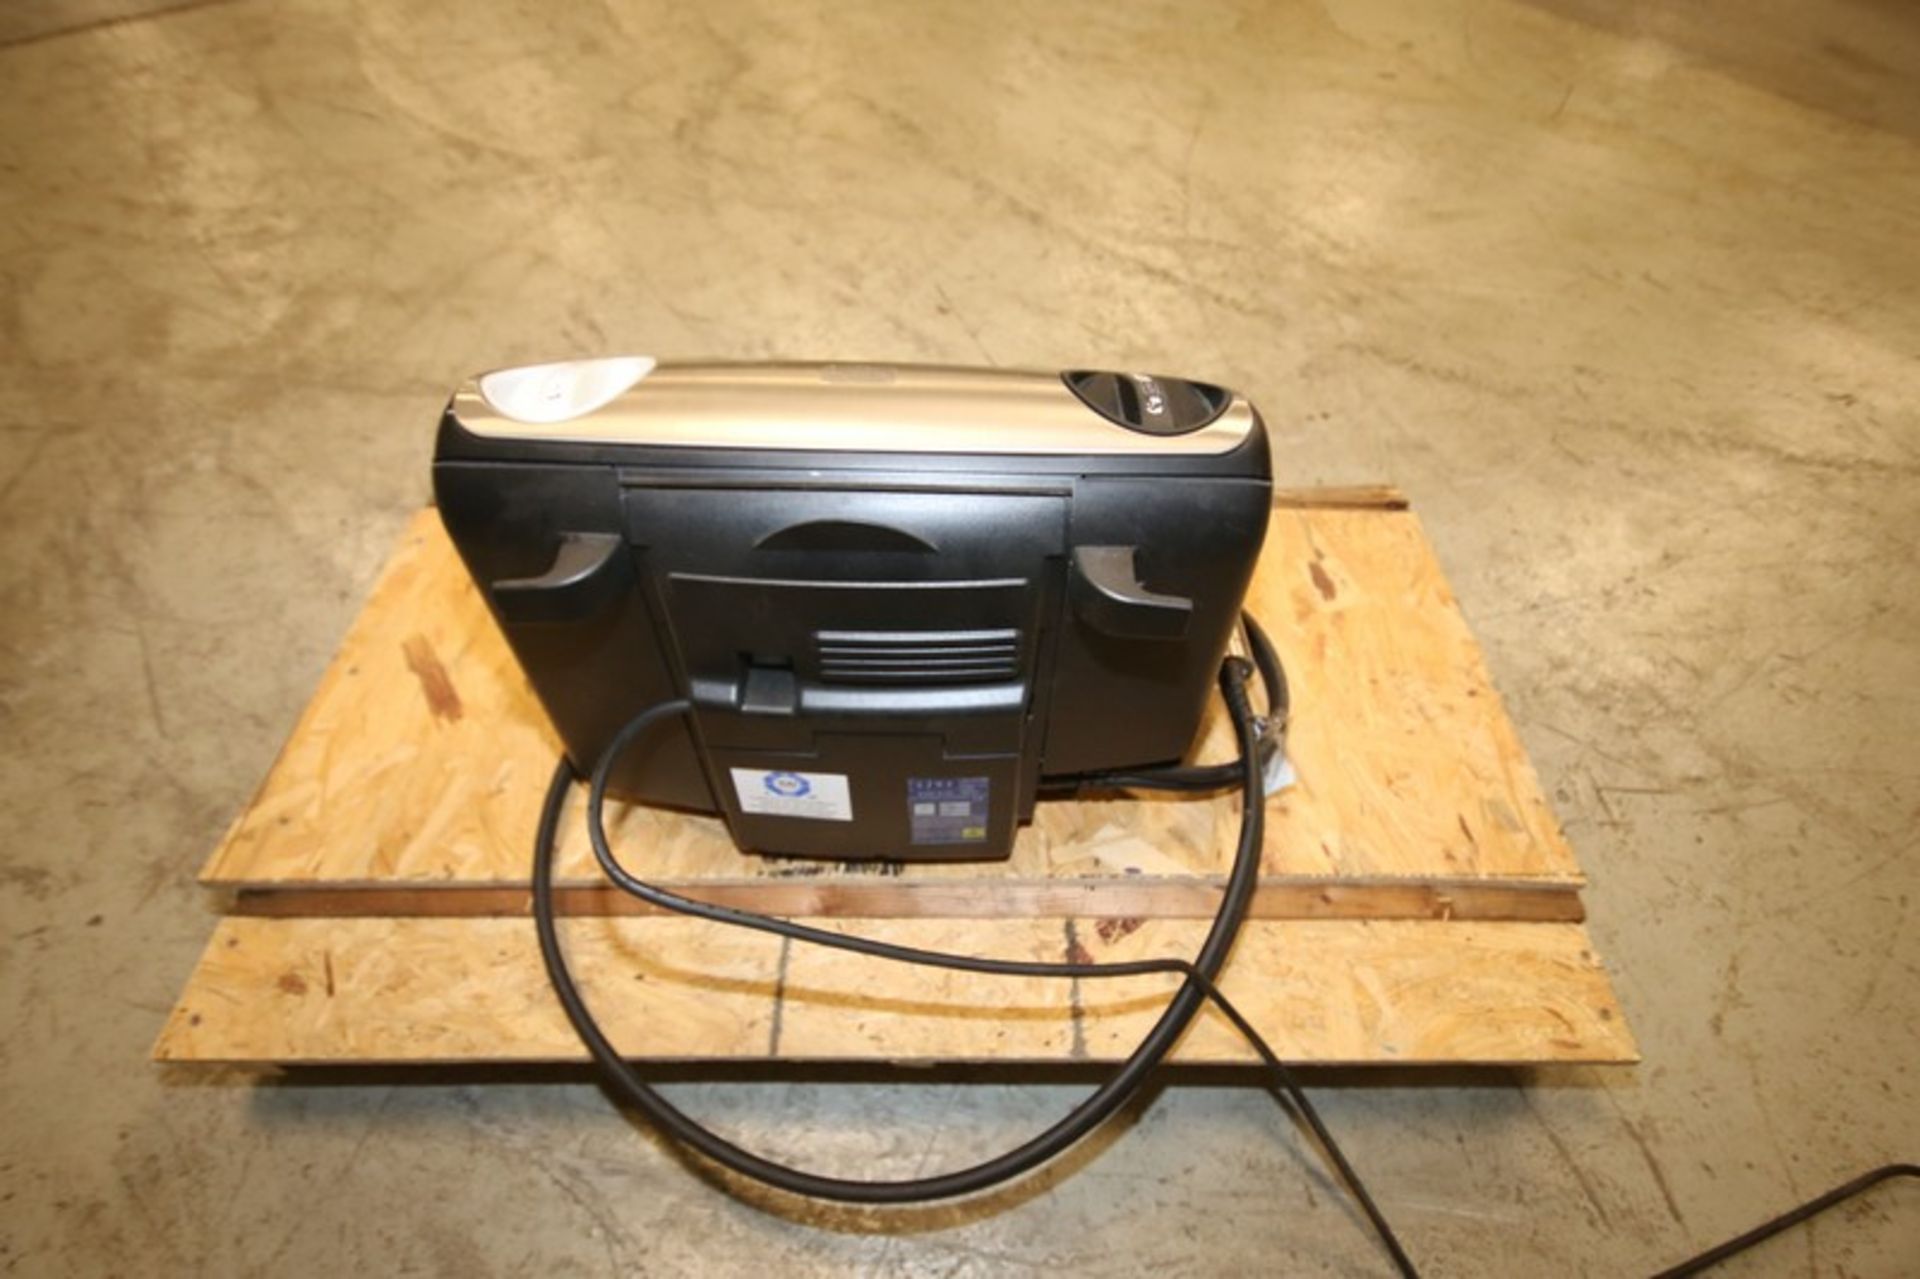 Linx Ink Jet Coder, Model CJ400, SN FZ503, with (1) Head (INV#101622 (Located @ the MDG Auction - Image 4 of 5